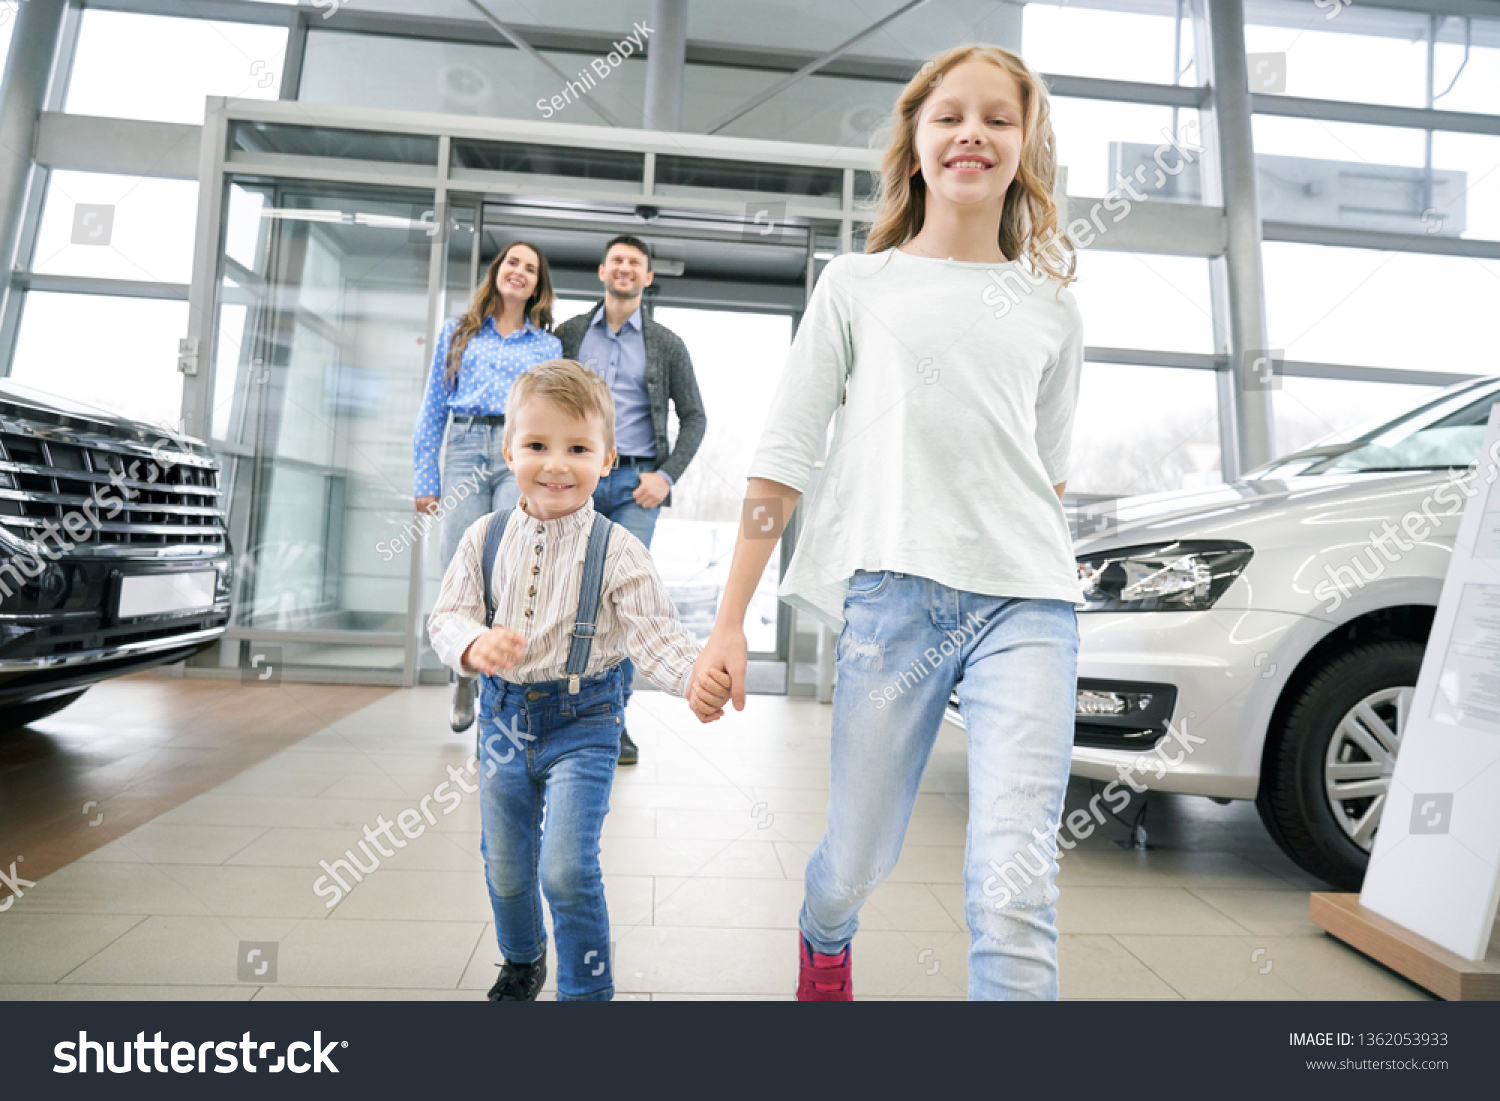 Front view of funny little boy with elder sister entering in big auto showroom. Cute children with parents looking at new cars, choosing and testing automobiles. Concept of car buying. #1362053933